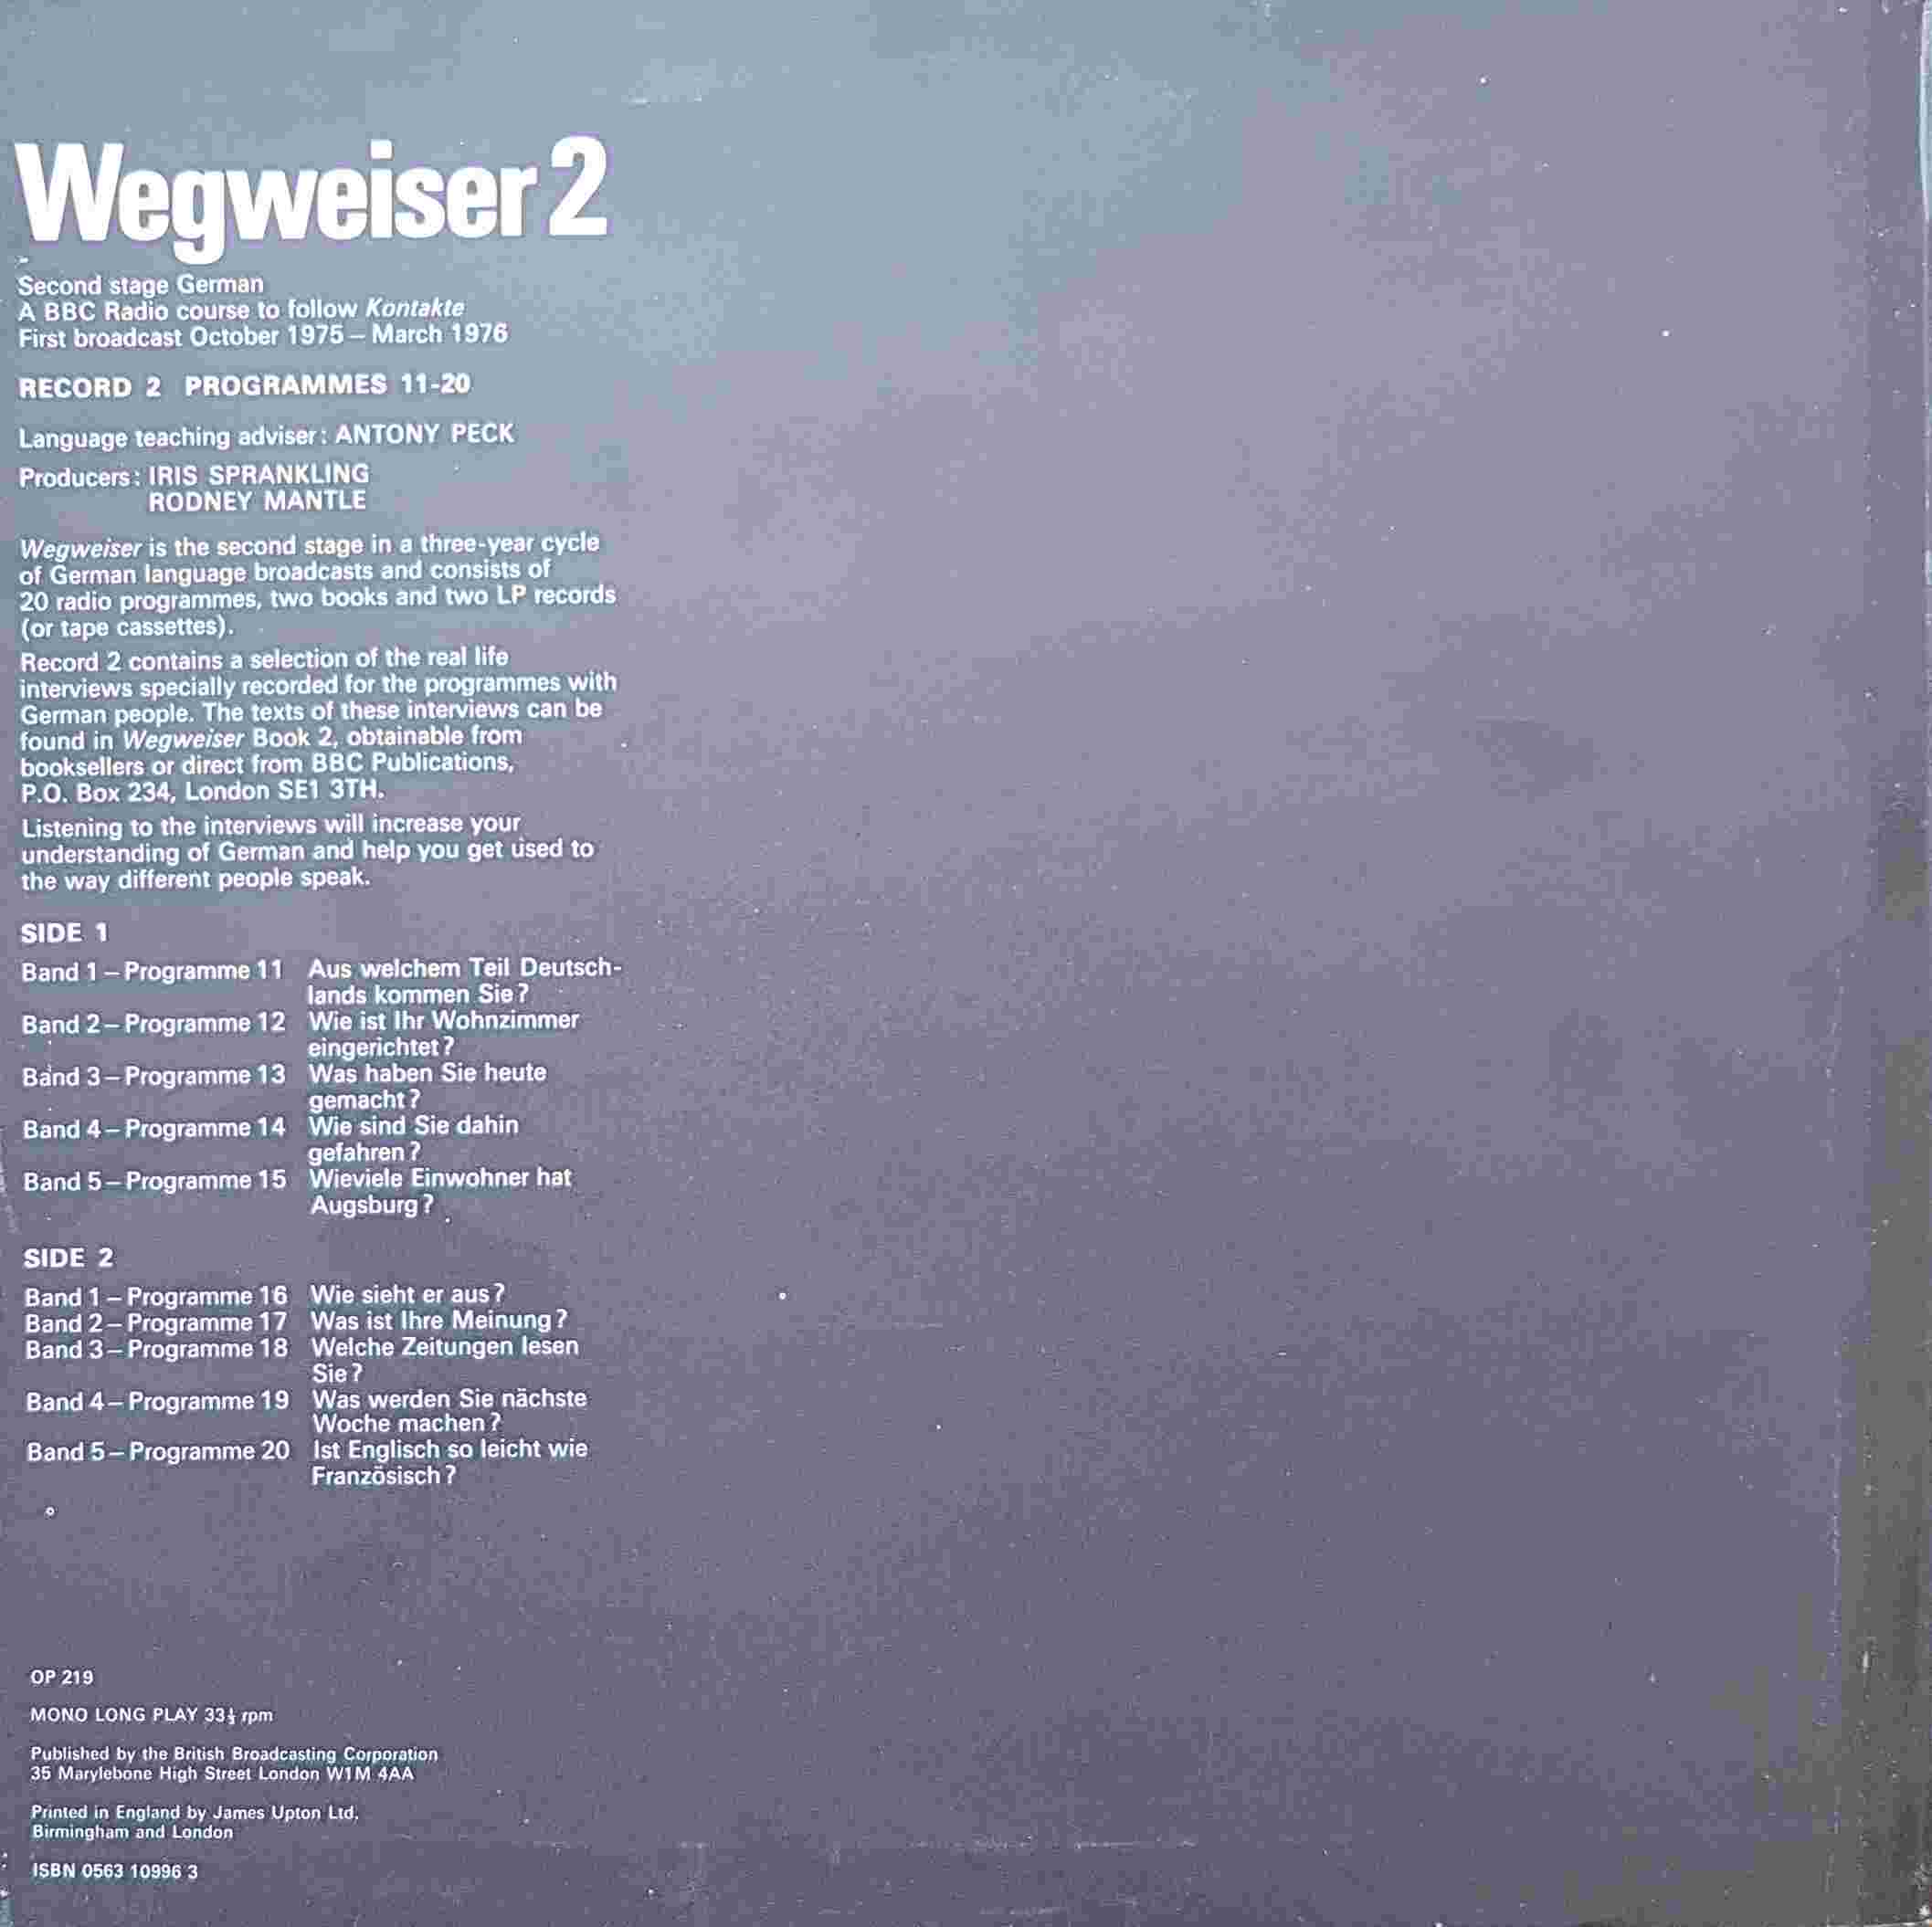 Picture of OP 219 Wegweiser 2 - Second stage course in German - Programmes 11 - 20 by artist Antony Peck from the BBC records and Tapes library